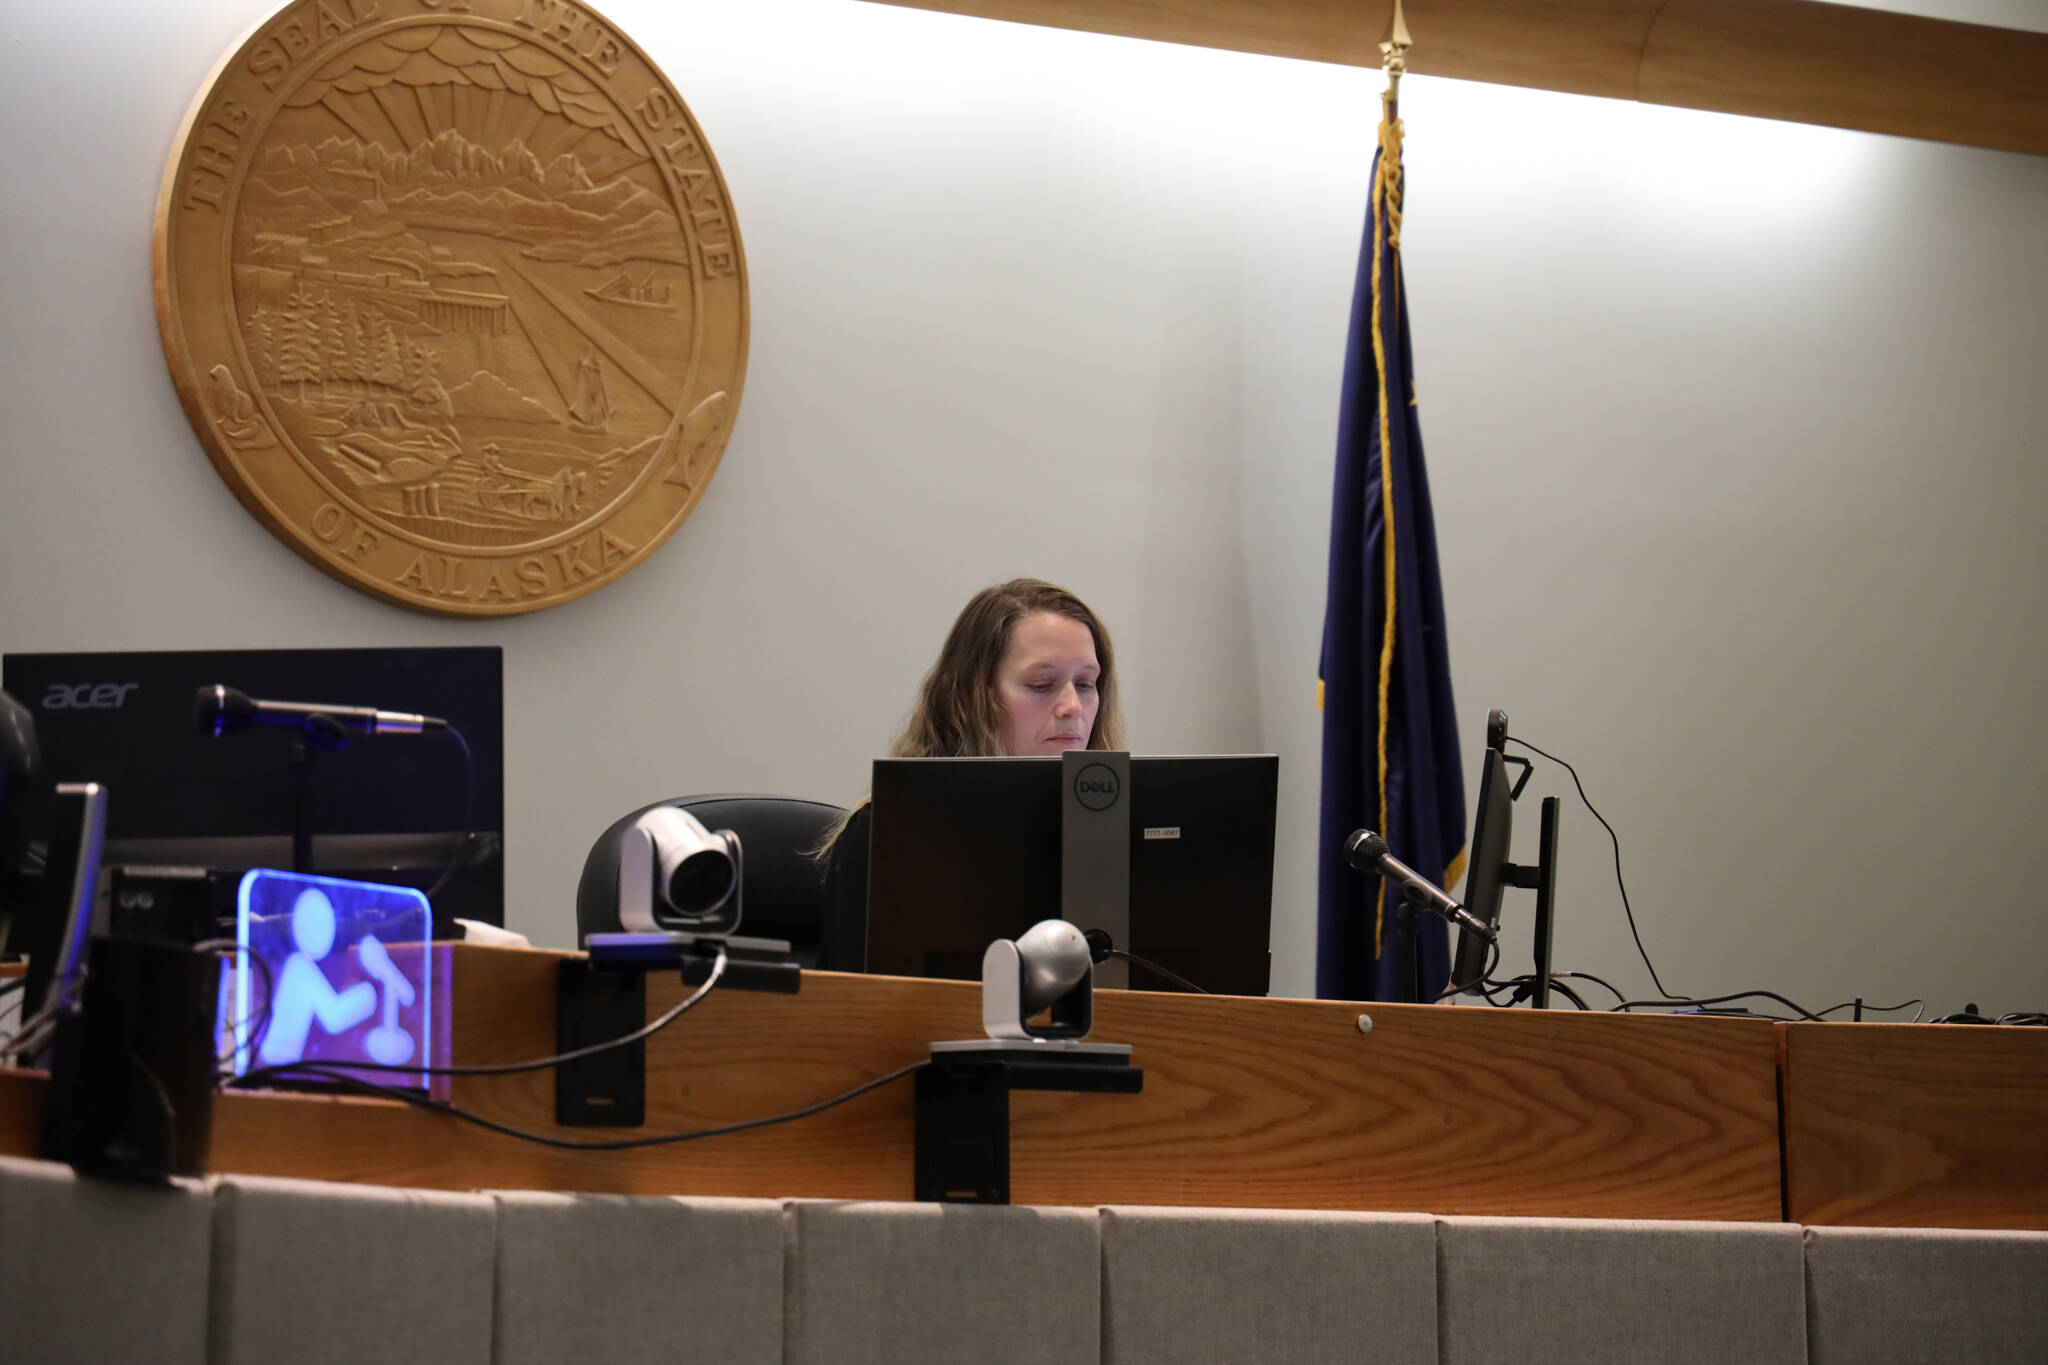 Judge Marianna Carpeneti presides Tuesday in the arraignment hearing for Anthony Michael Migliaccio who was arrested in November on charges in the killing of Faith Rogers. Migliaccio called in for the hearing via phone call from Lemon Creek Correctional Center. (Clarise Larson / Juneau Empire)